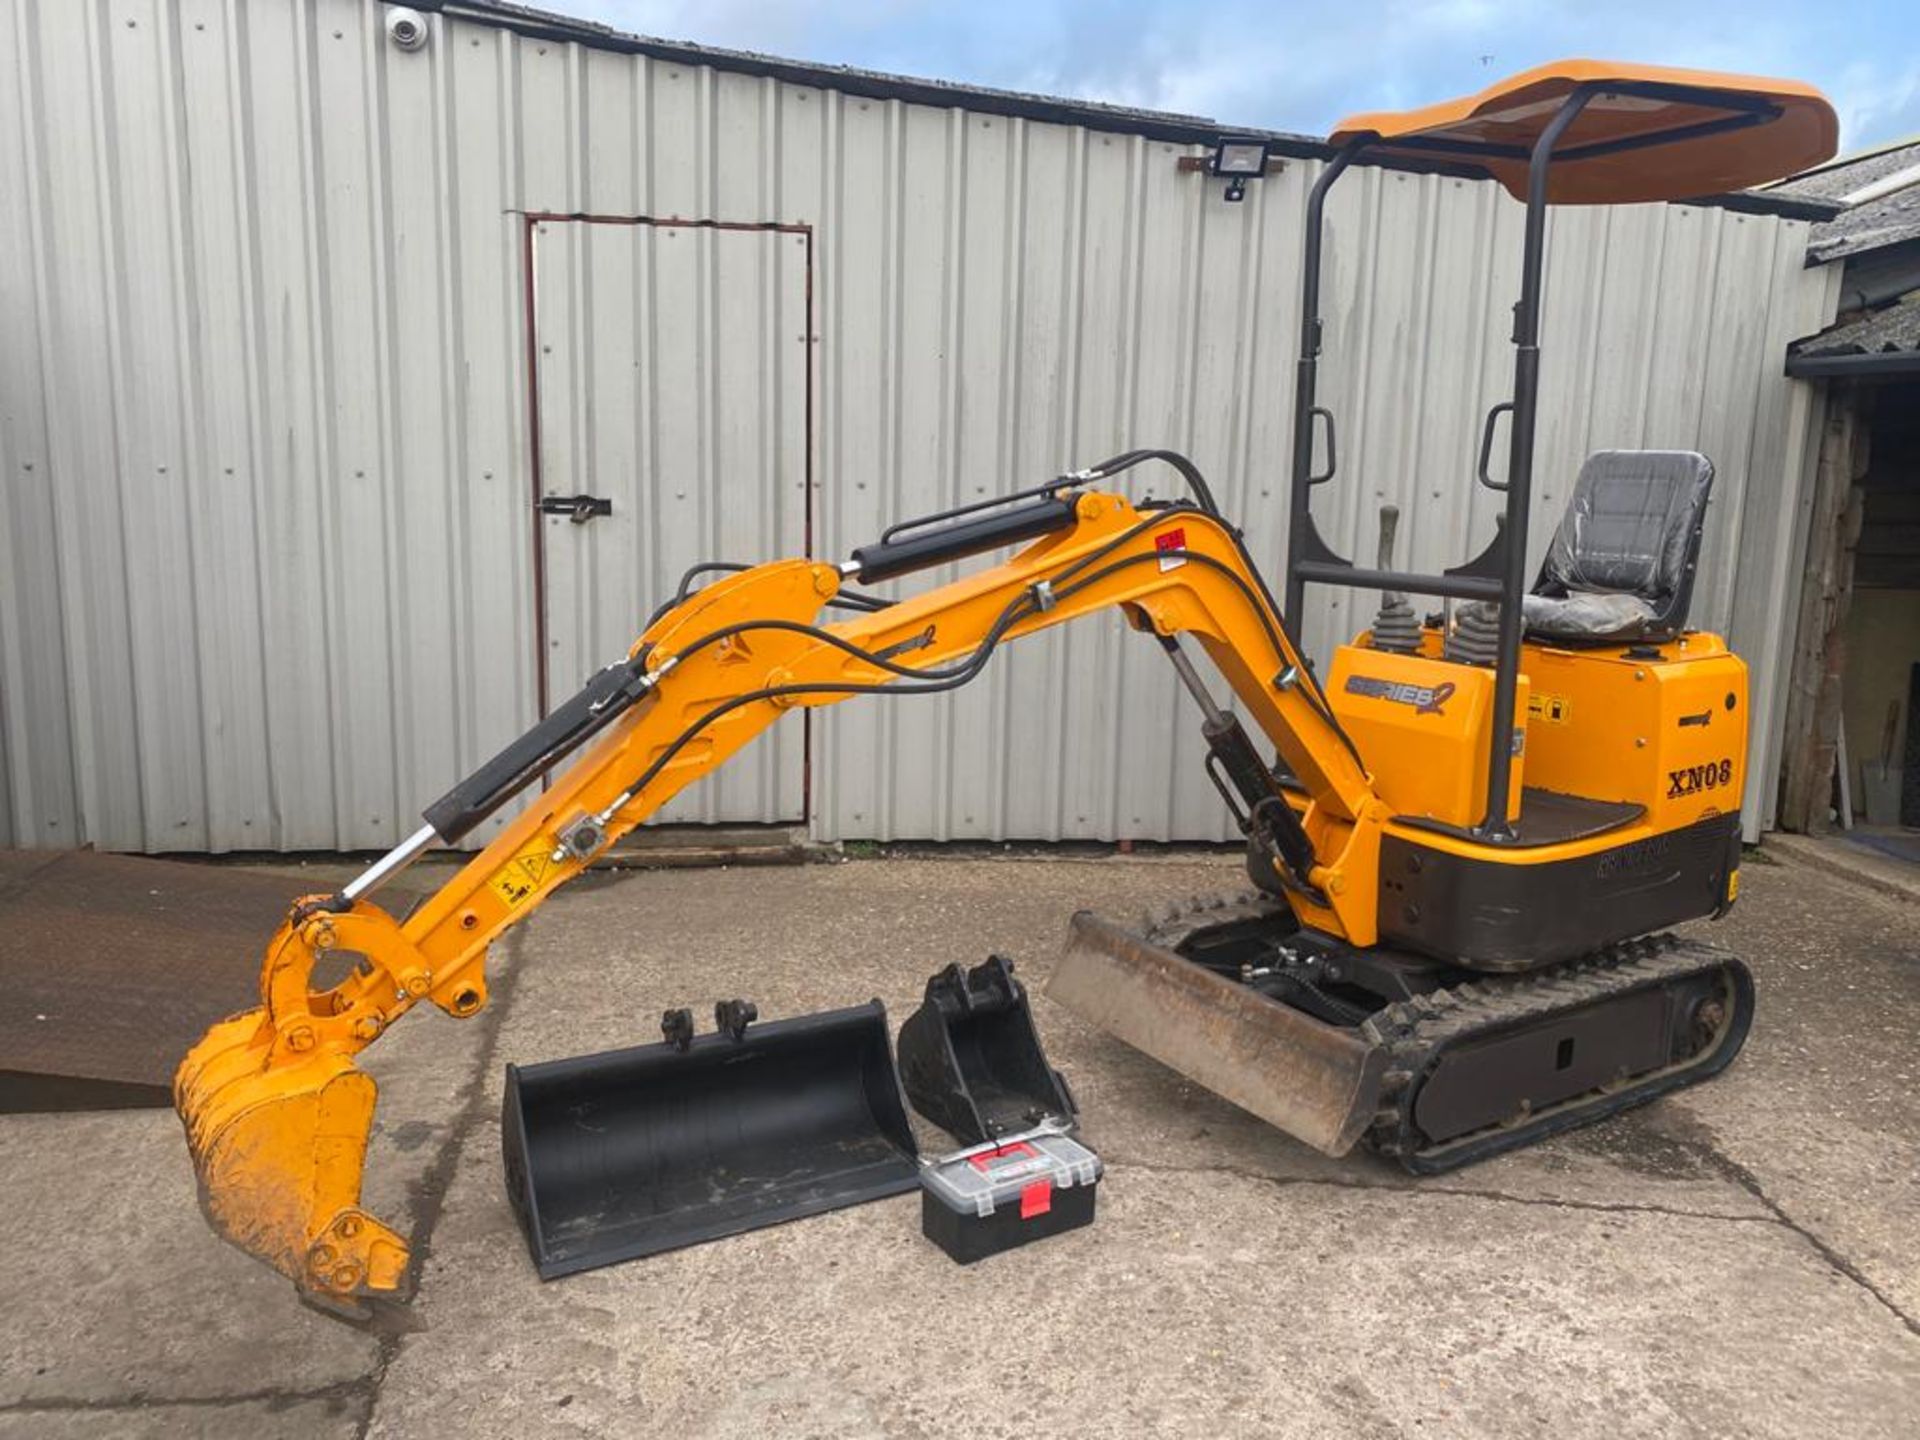 Rhinoceros XN08 Excavator only 66 hours date of manufacture April 2020, c/w 3 buckets and tool kit